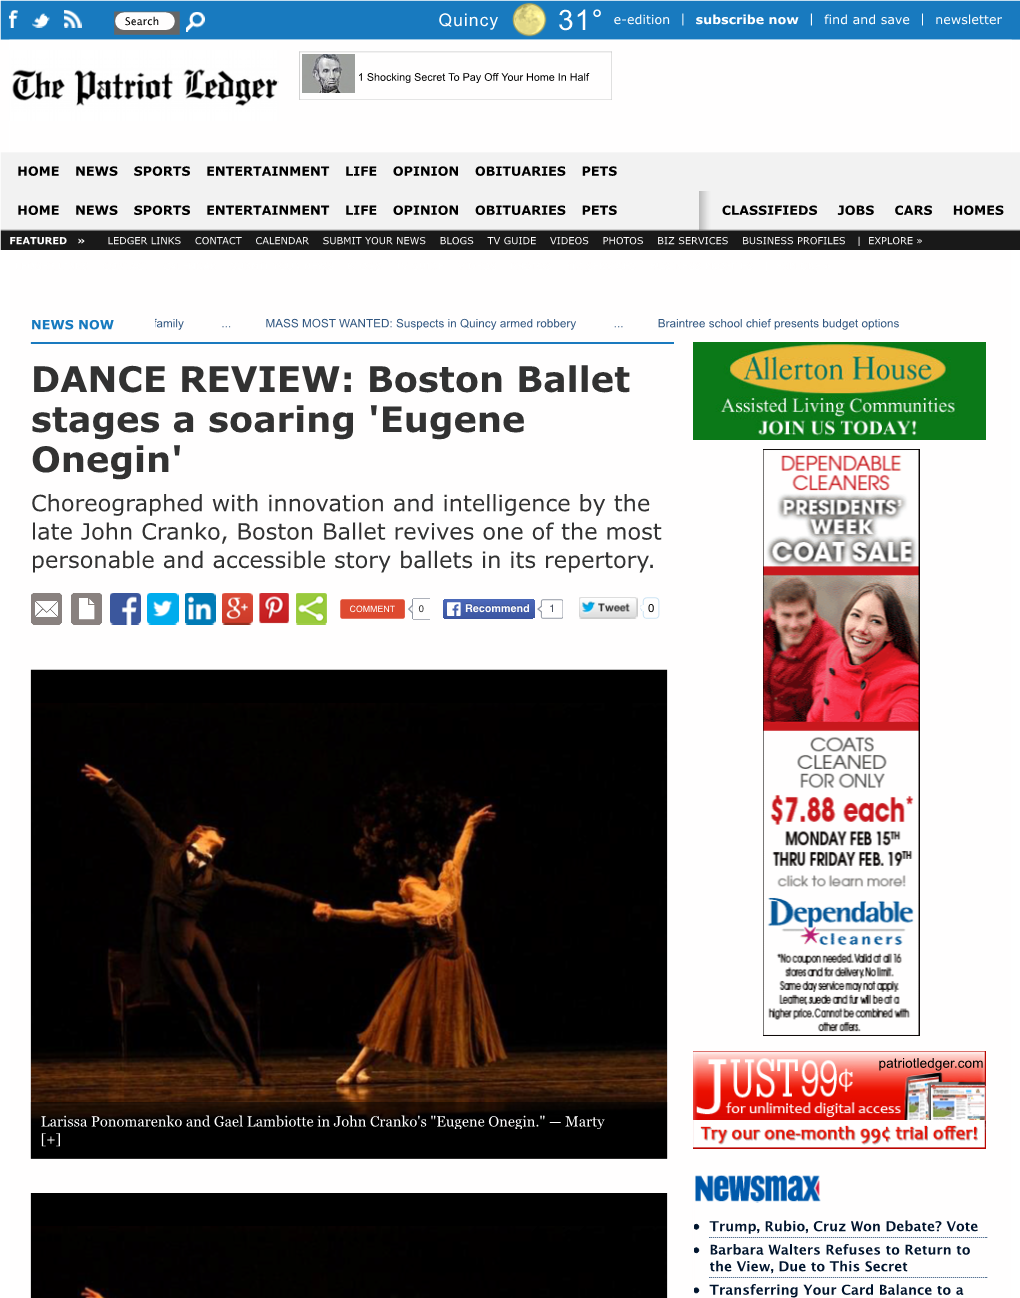 DANCE REVIEW: Boston Ballet Stages a Soaring 'Eugene Onegin'